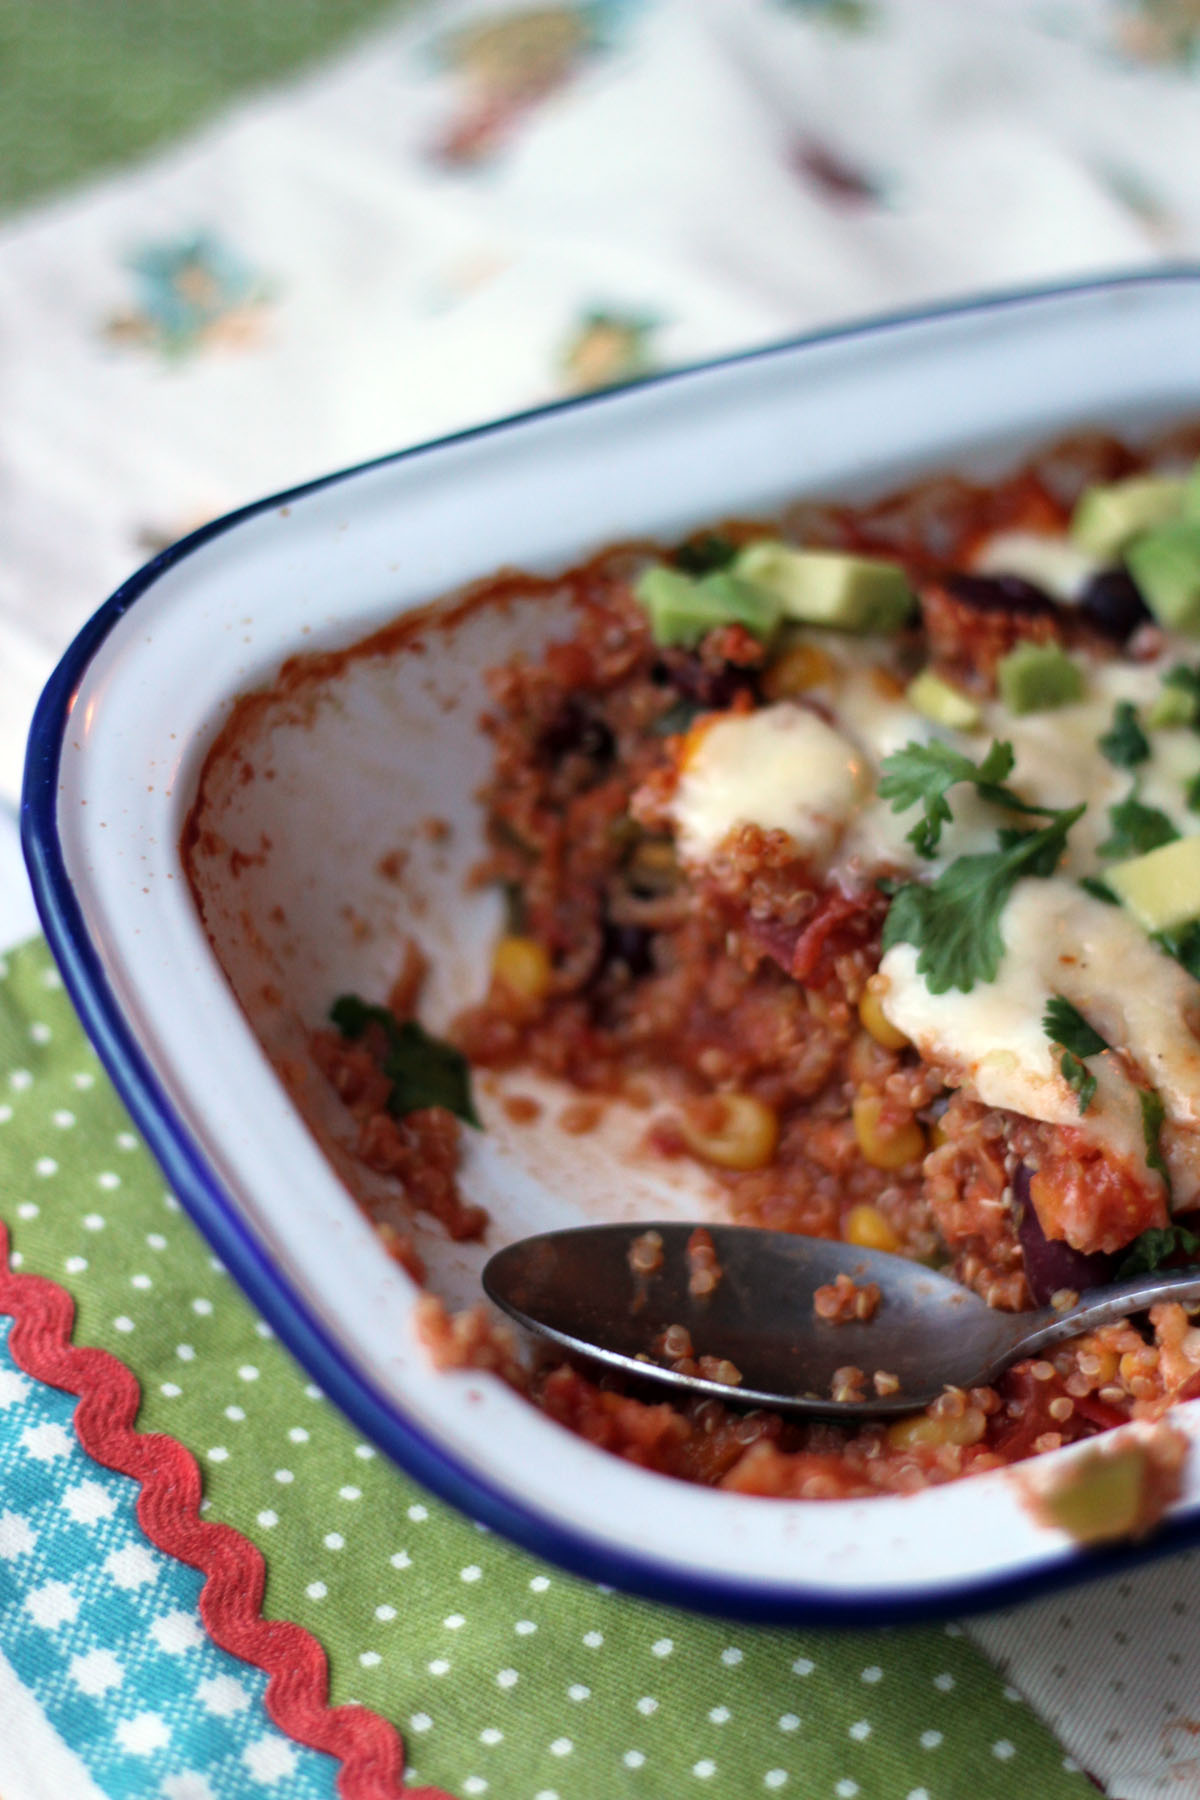 Dig into this Mexican Quinoa Casserole from Supper in the Suburbs